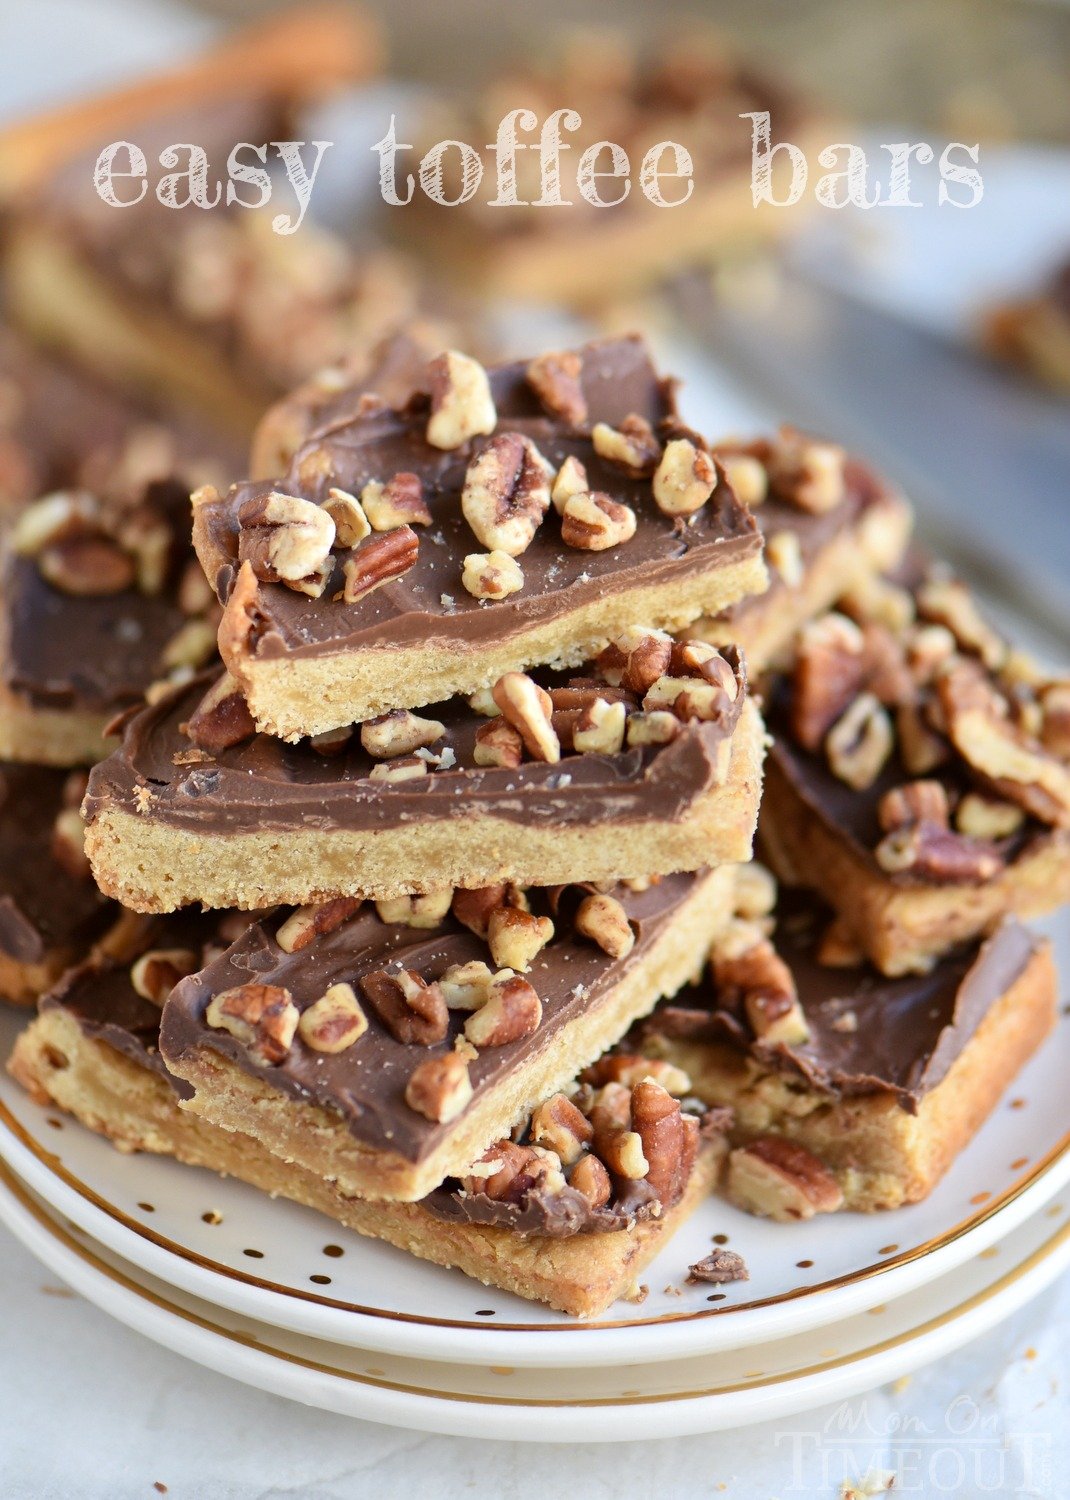 You’re going to go crazy for these Easy Toffee Bars! Simply delicious cookie bars topped with milk chocolate and pecans! Just fantastic! // Mom On Timeout